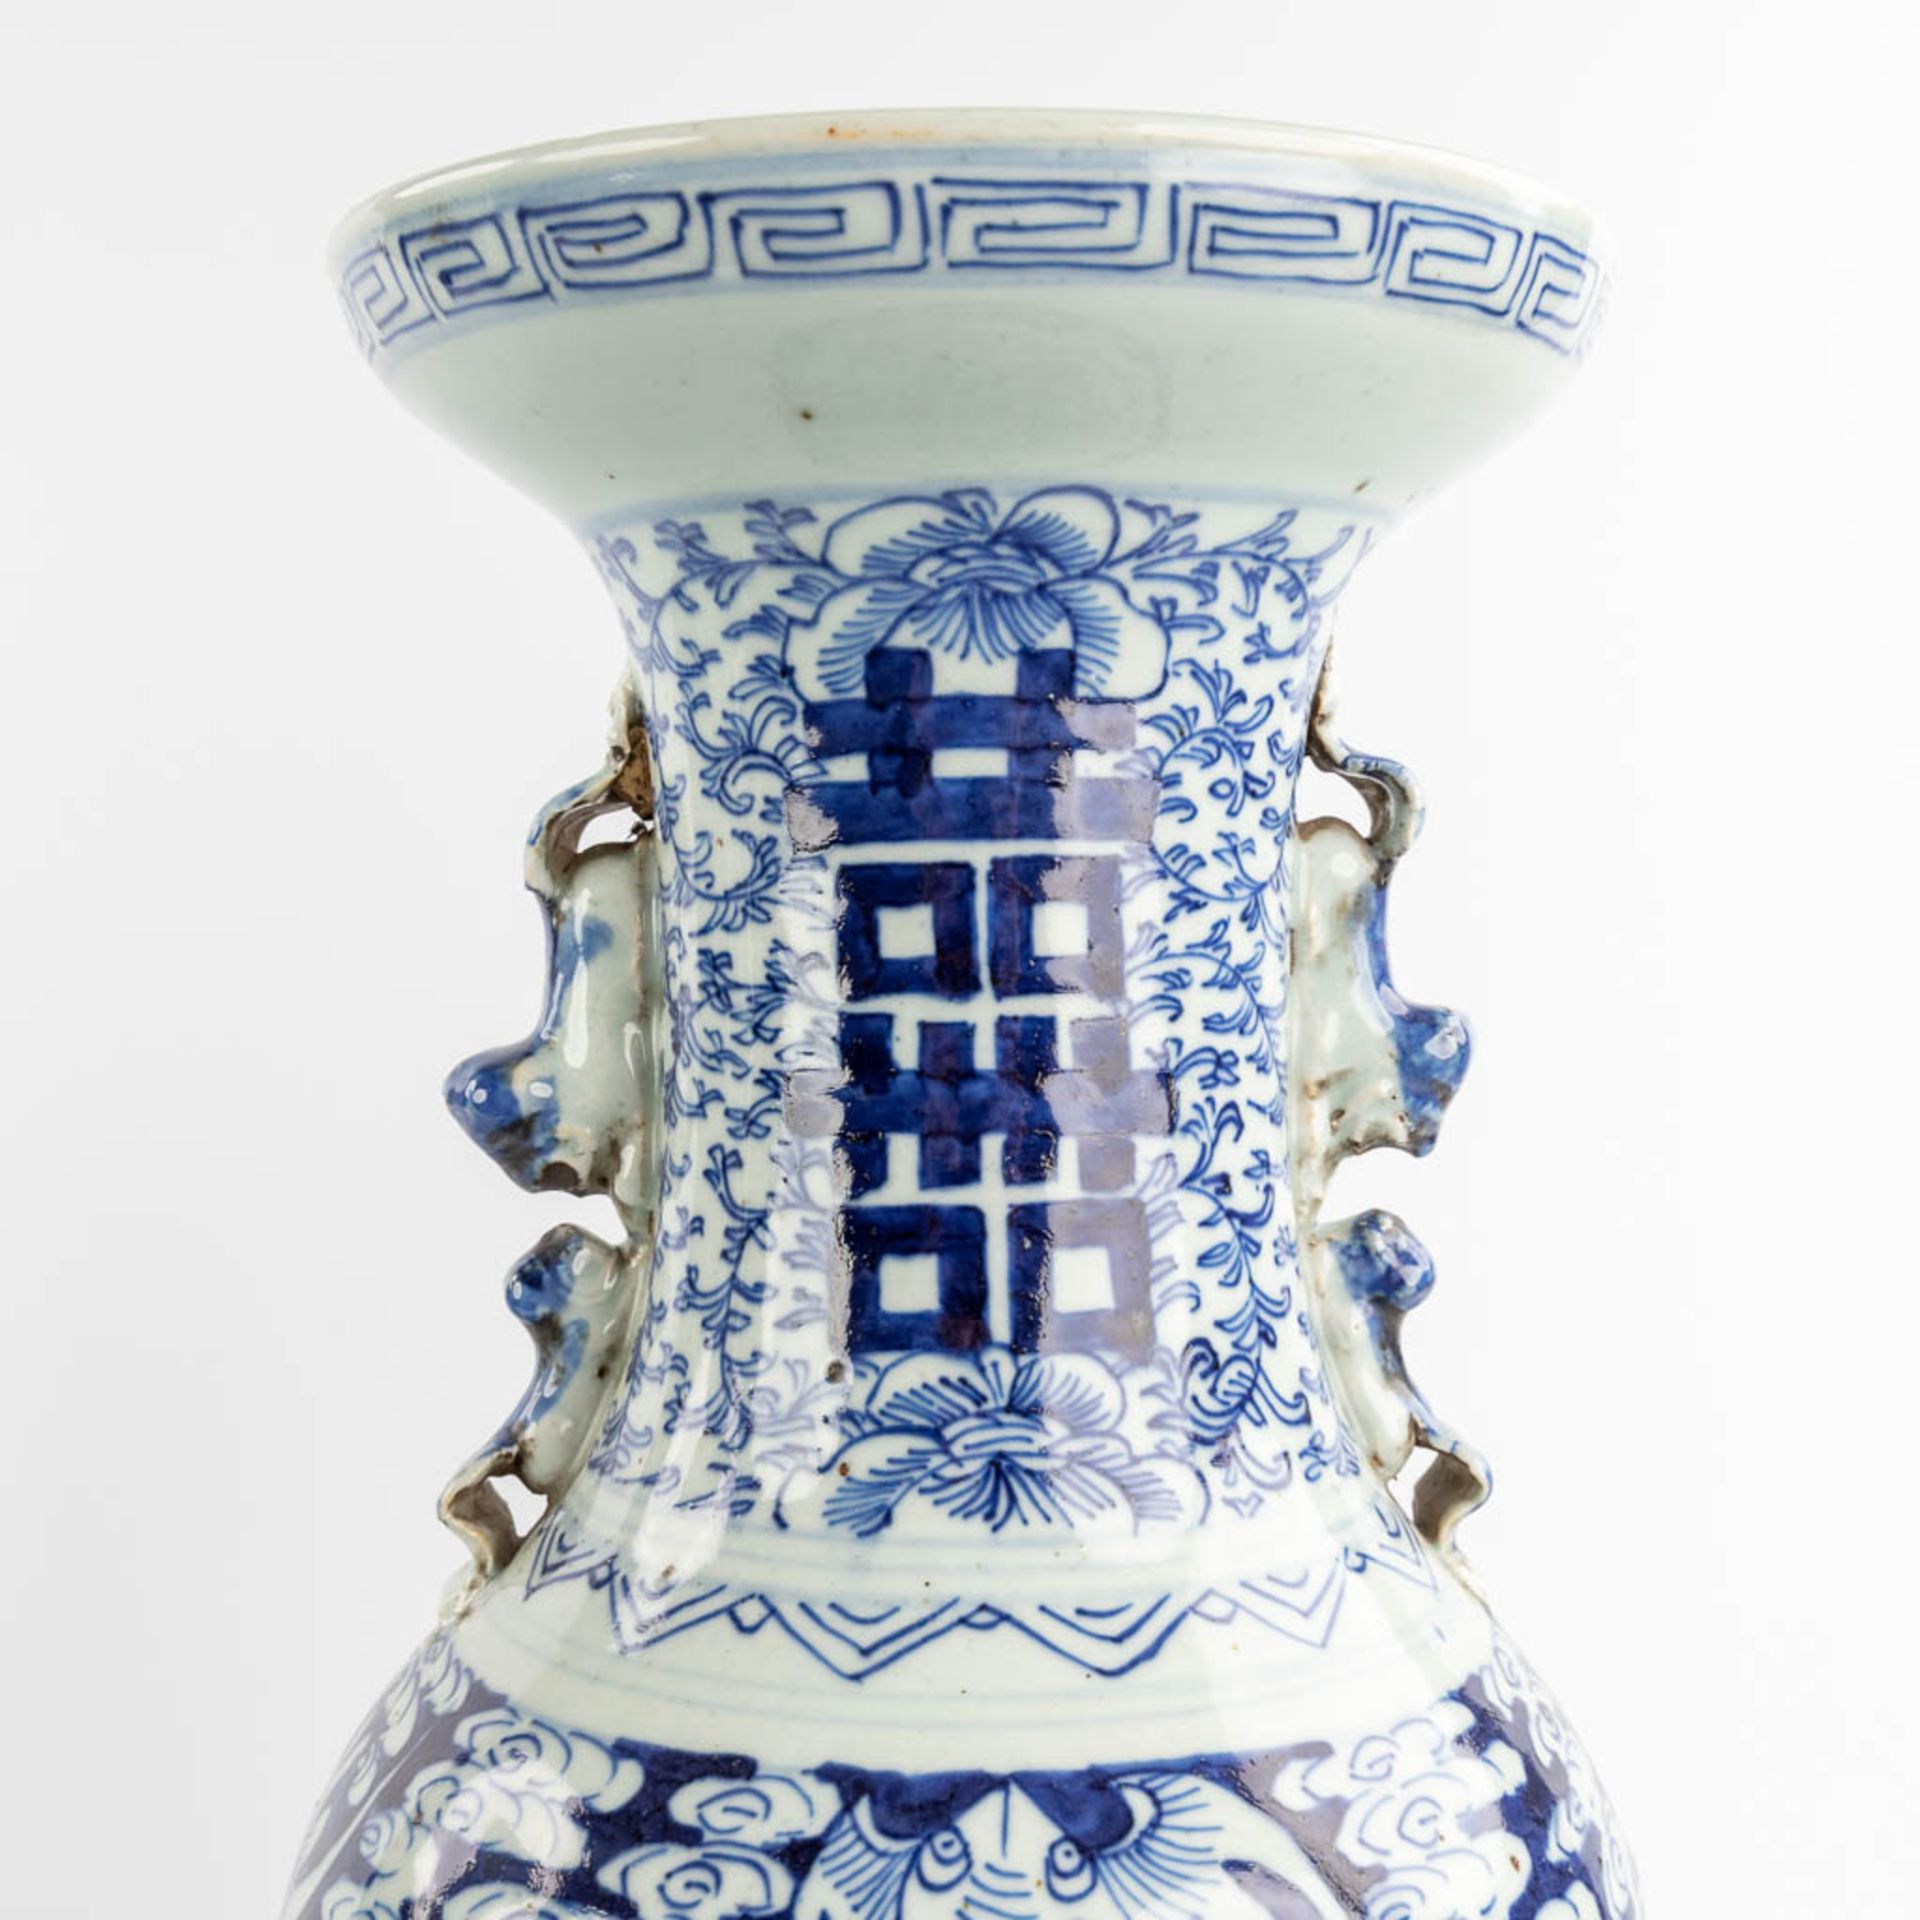 Two Chinese vases with blue-white double xi-sign of happiness. 19th/20th C. (H:60 x D:21 cm) - Image 9 of 12